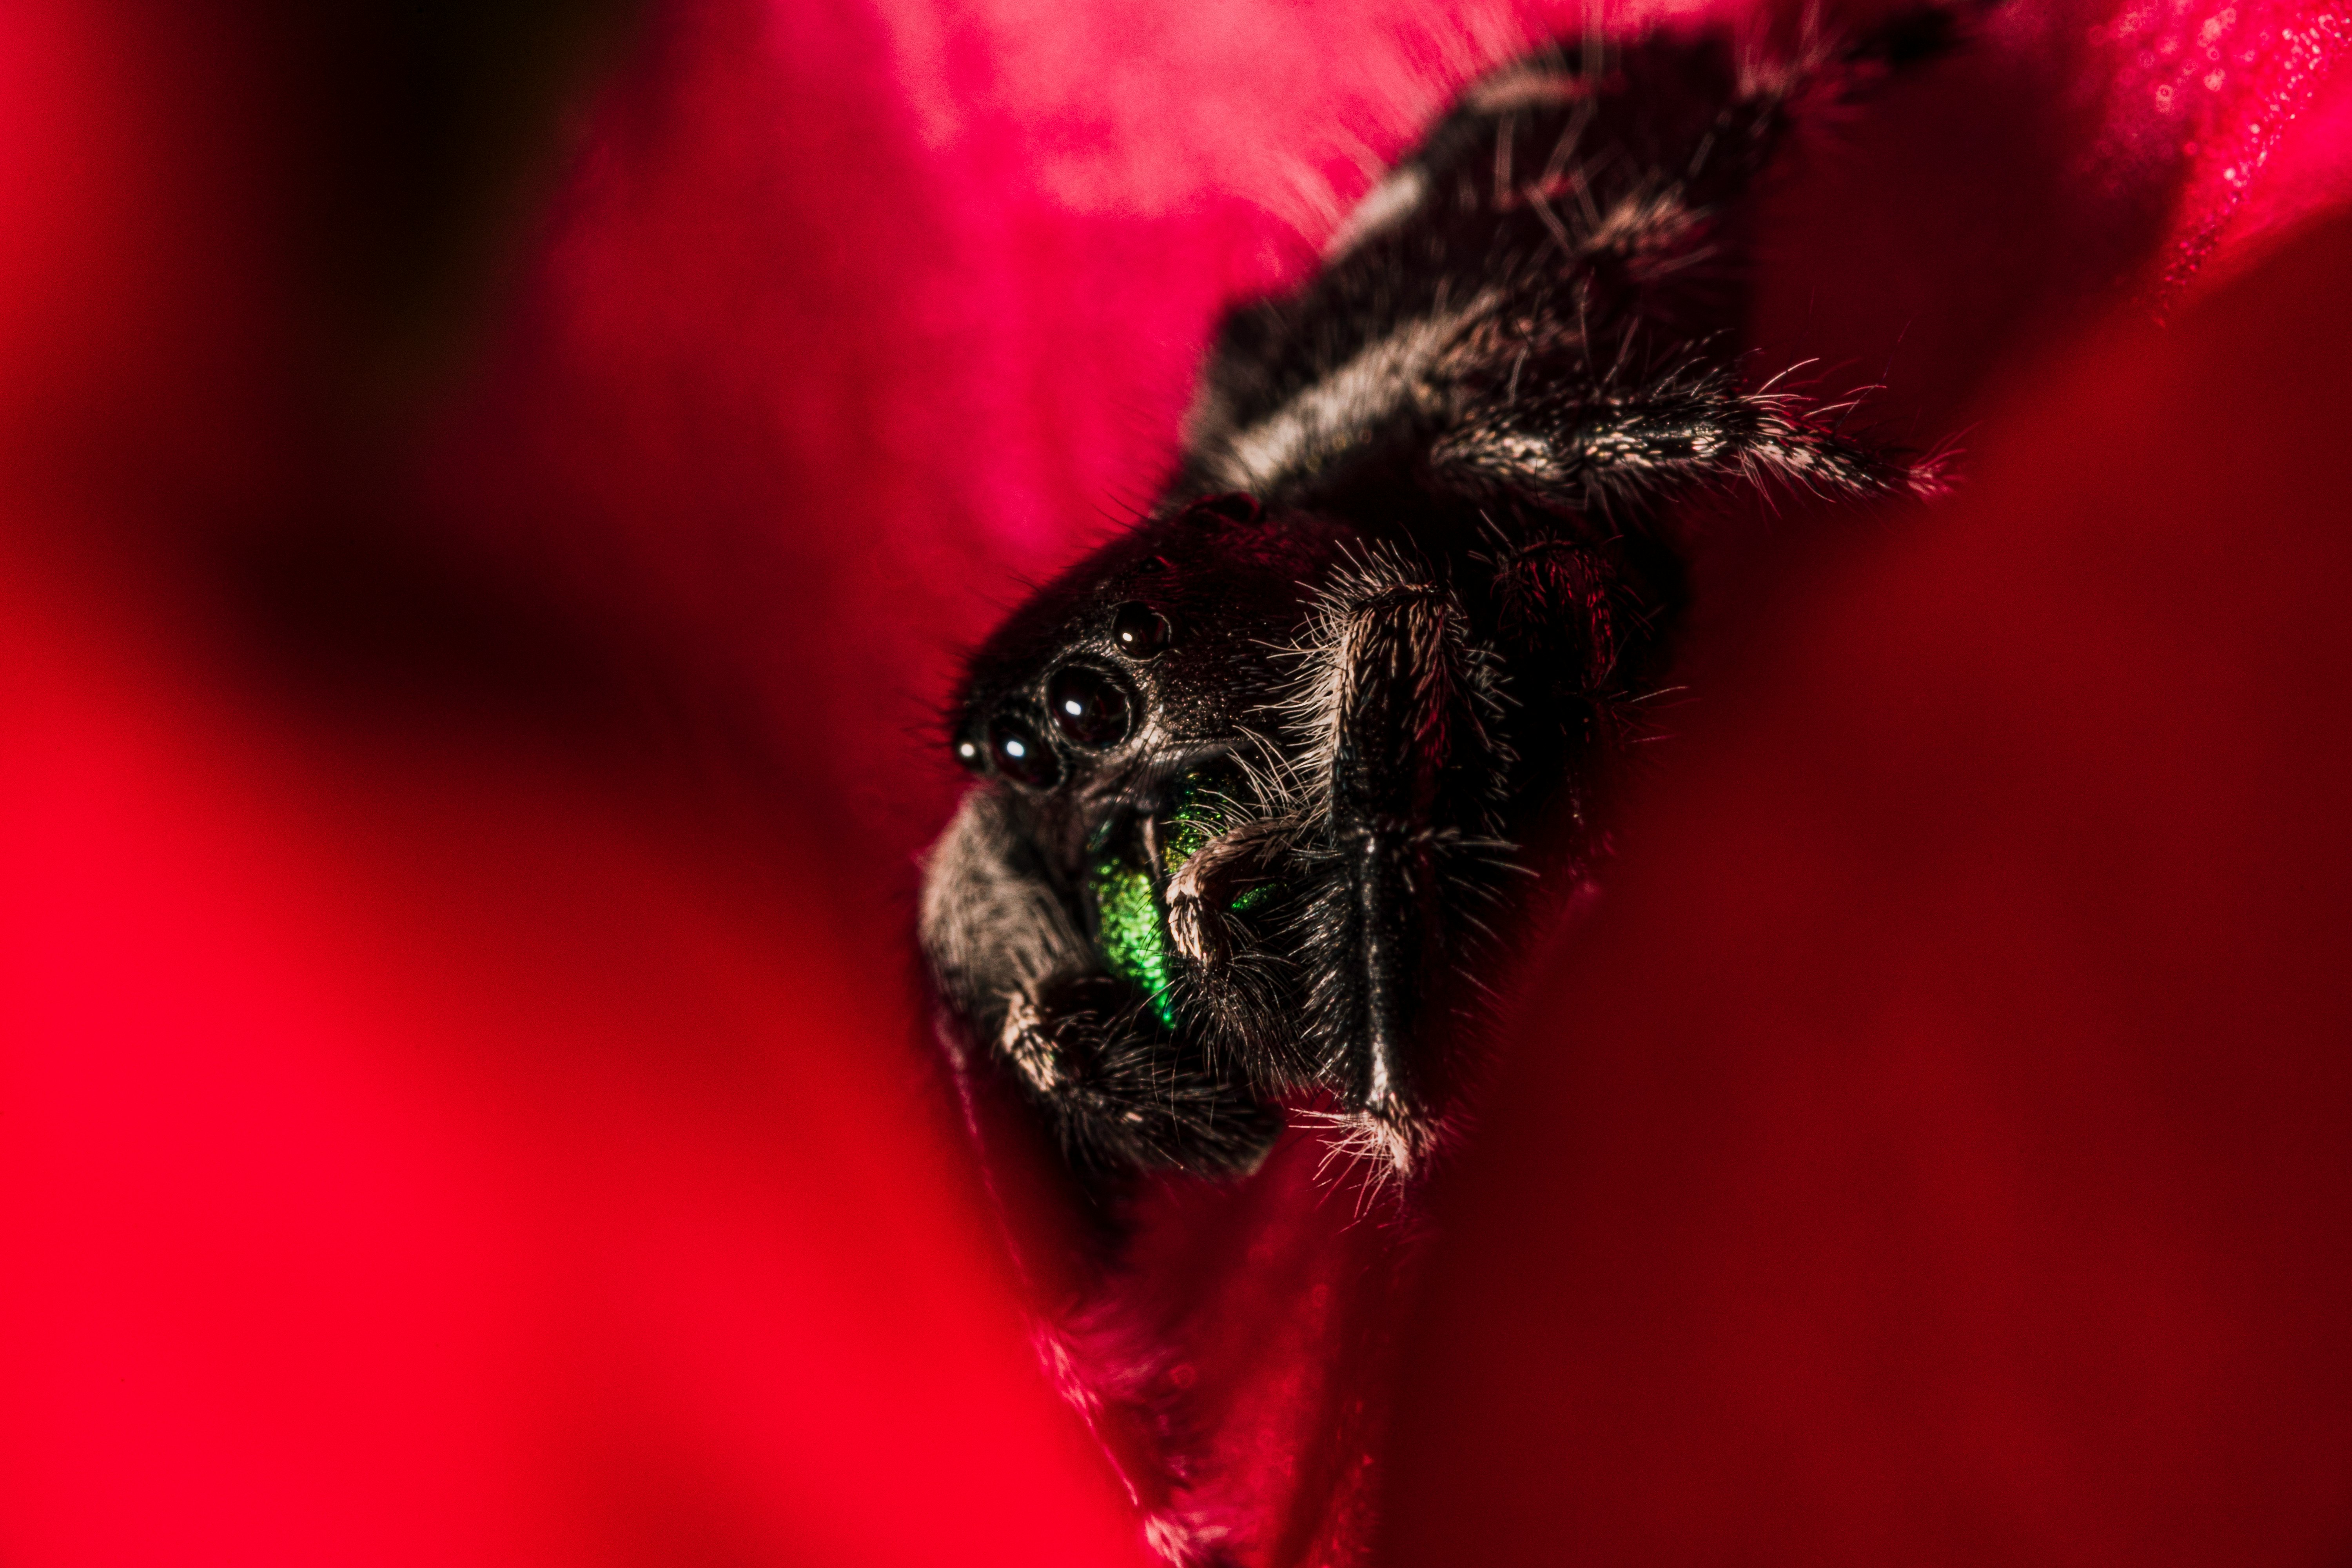 This is a bold jumping spider (Phidippus audax) resting on the petals of an azalea flower. I set this up with color theory in mind; the green iridescence of the chelicerae and the magenta-red petals of the azalea go great together!